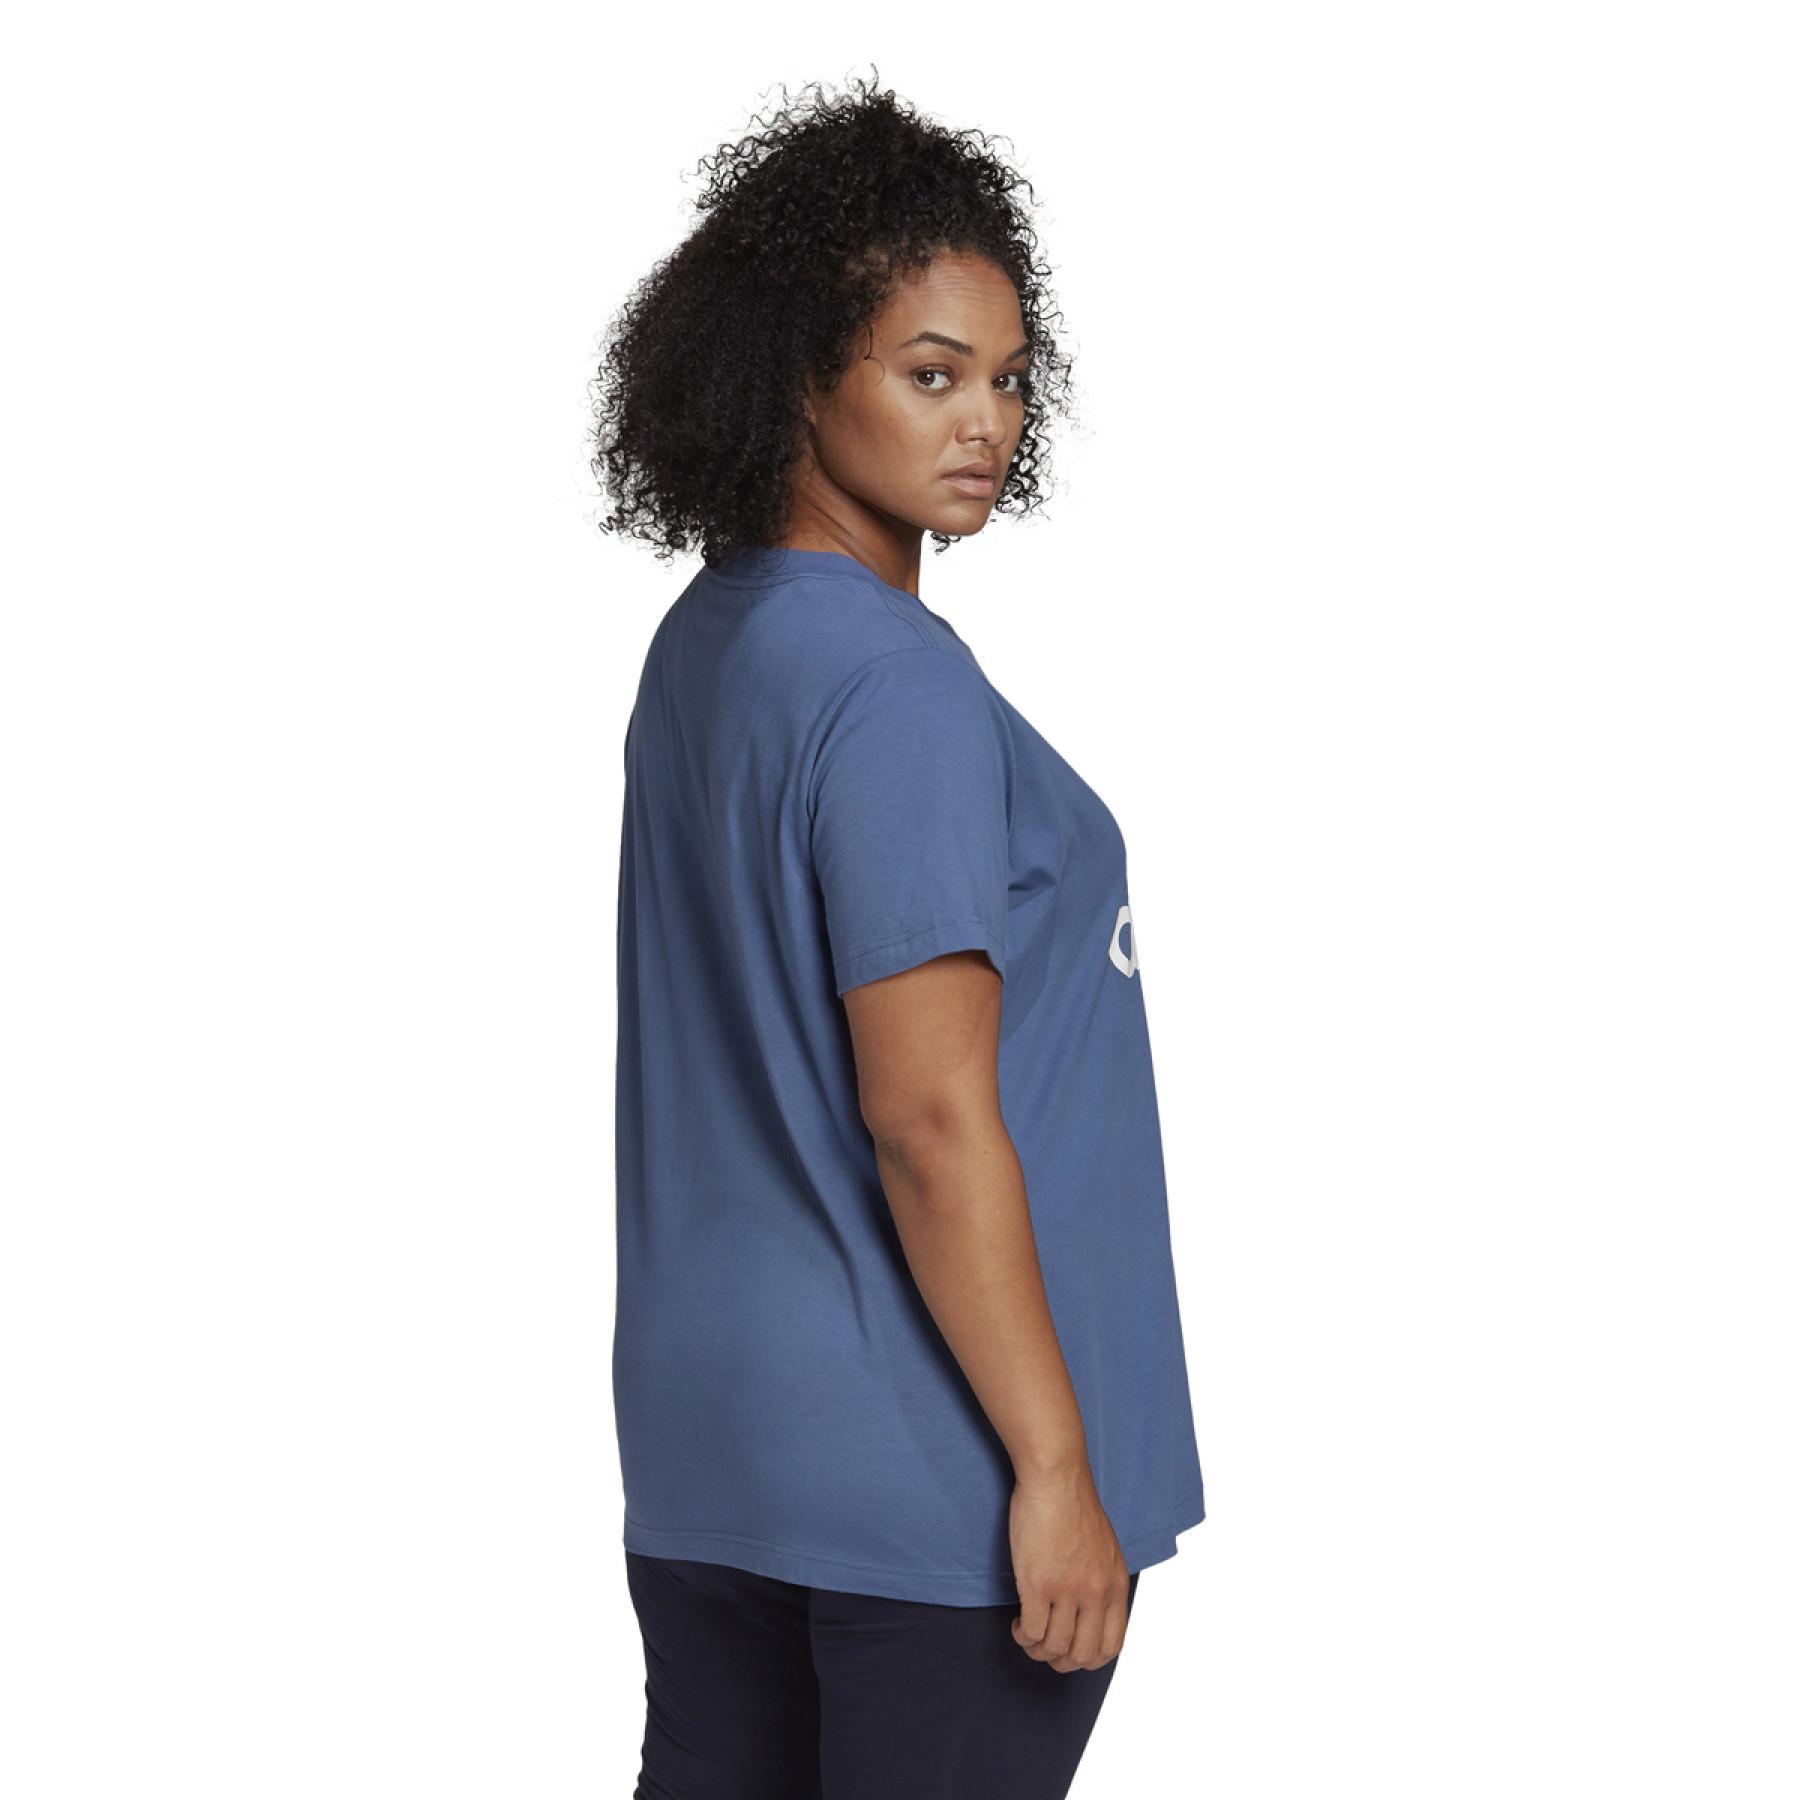 Women's T-shirt adidas Must Haves Badge of Sport Grande Taille